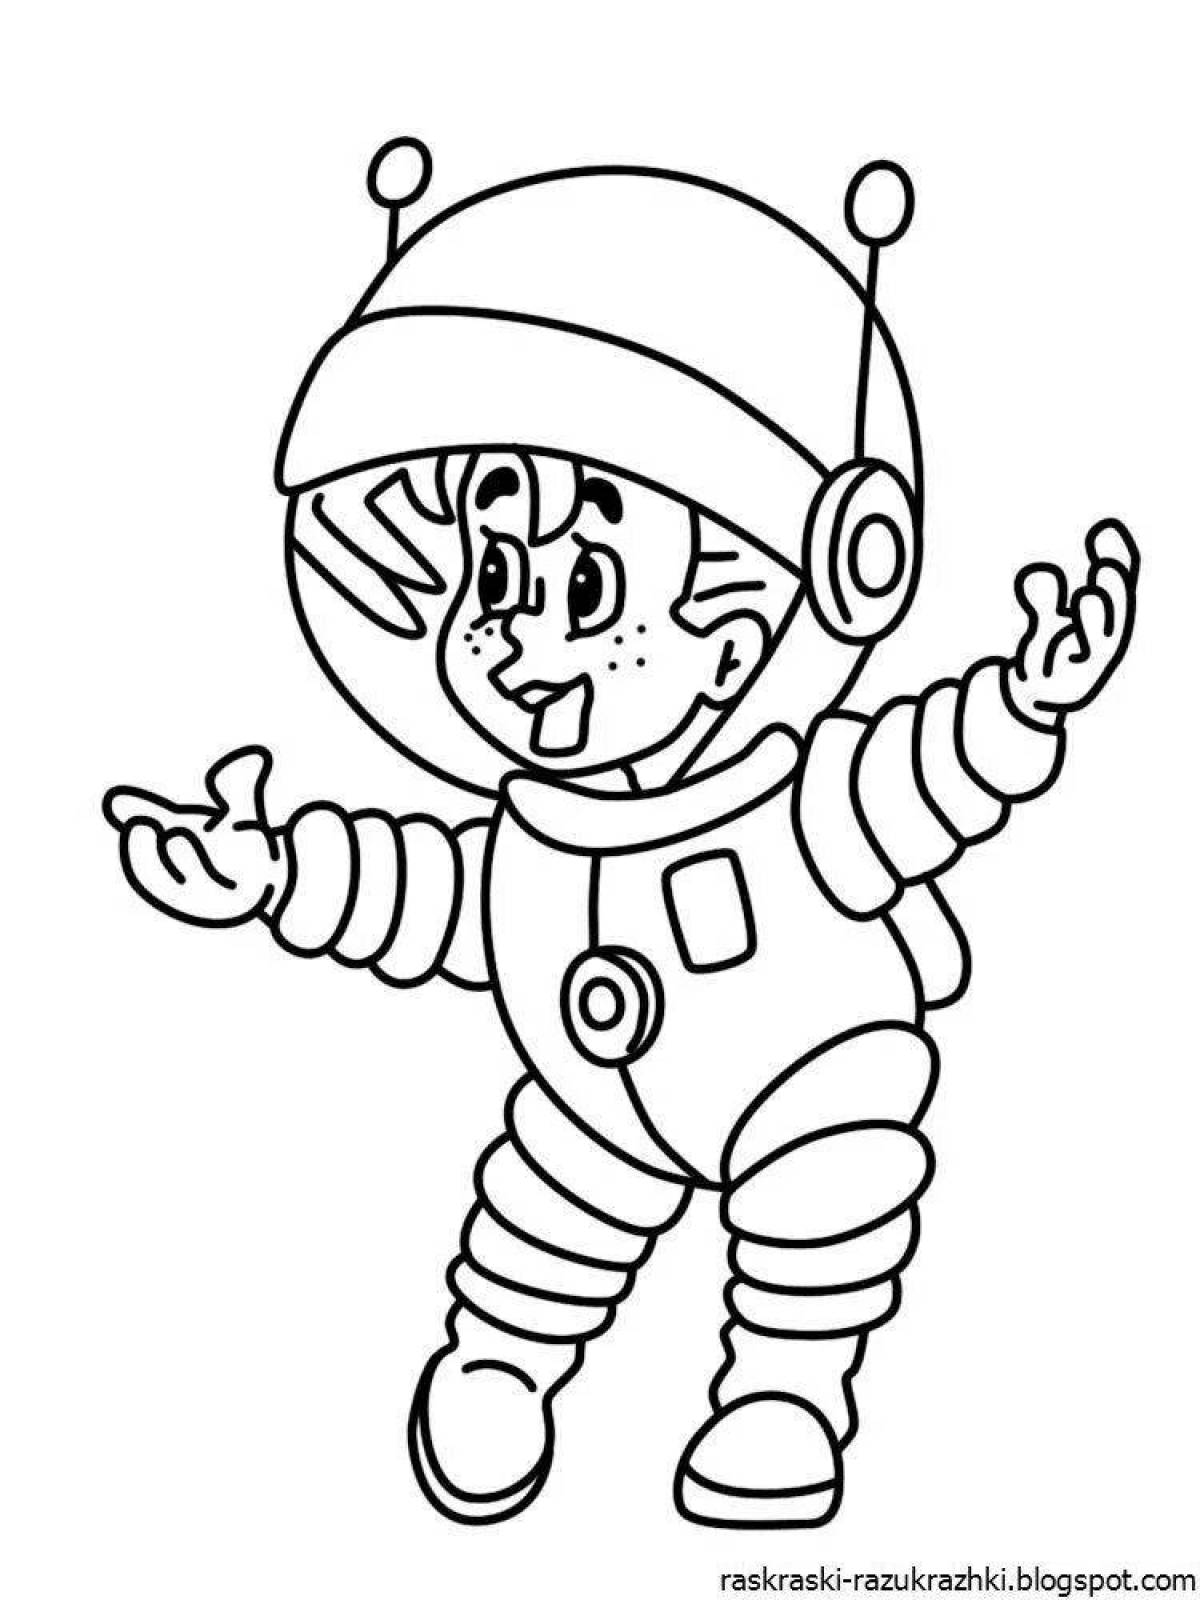 Coloring book cheerful astronaut for children